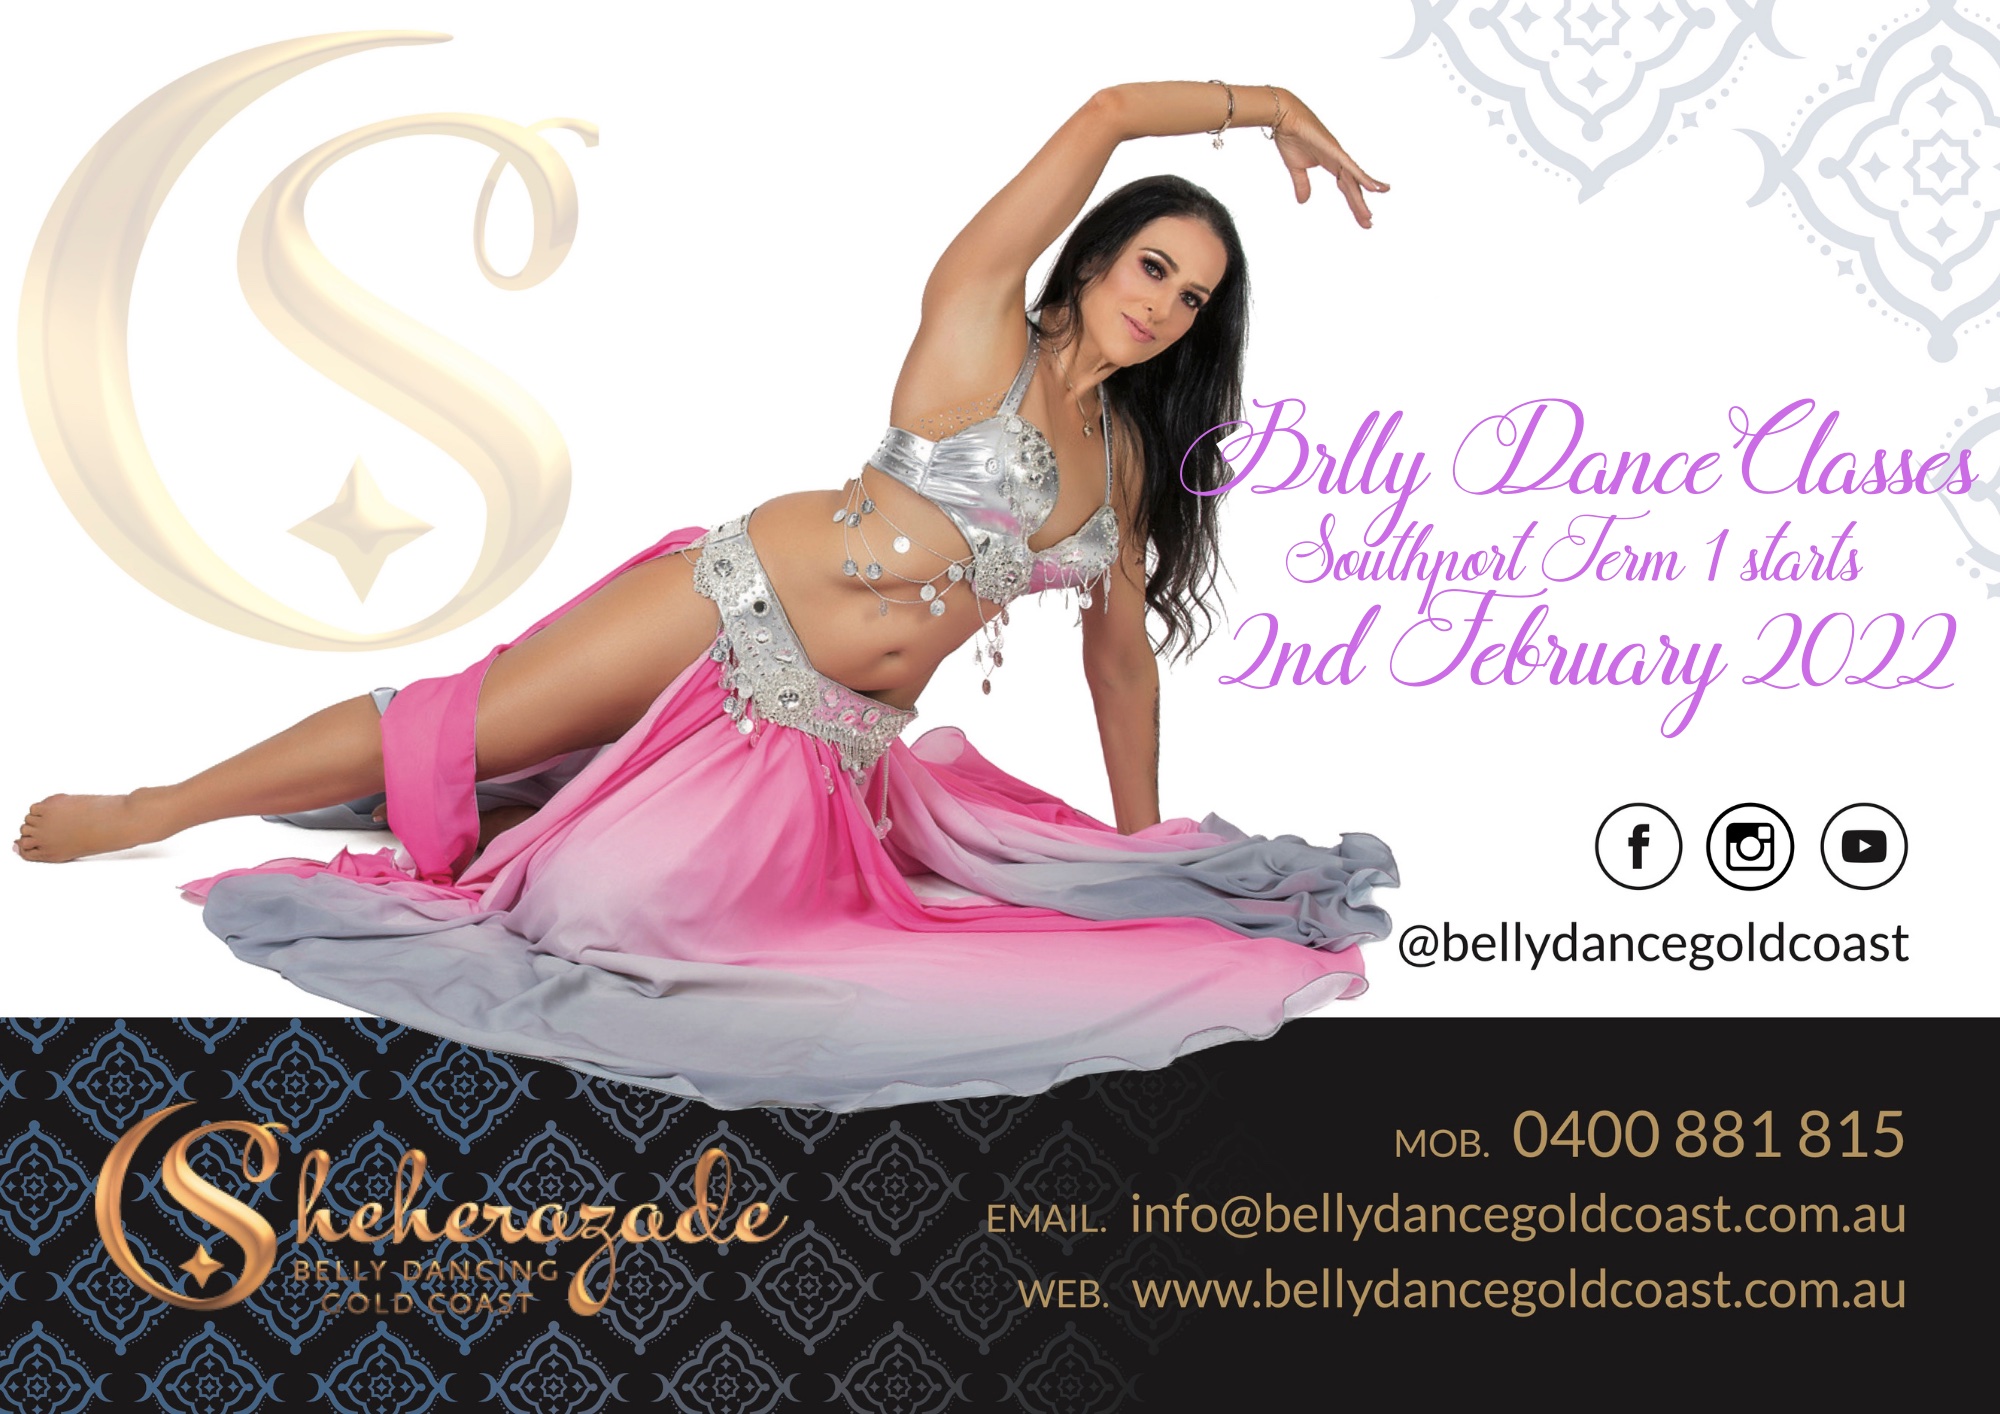 Term 2022 Southport Belly Dance Classes